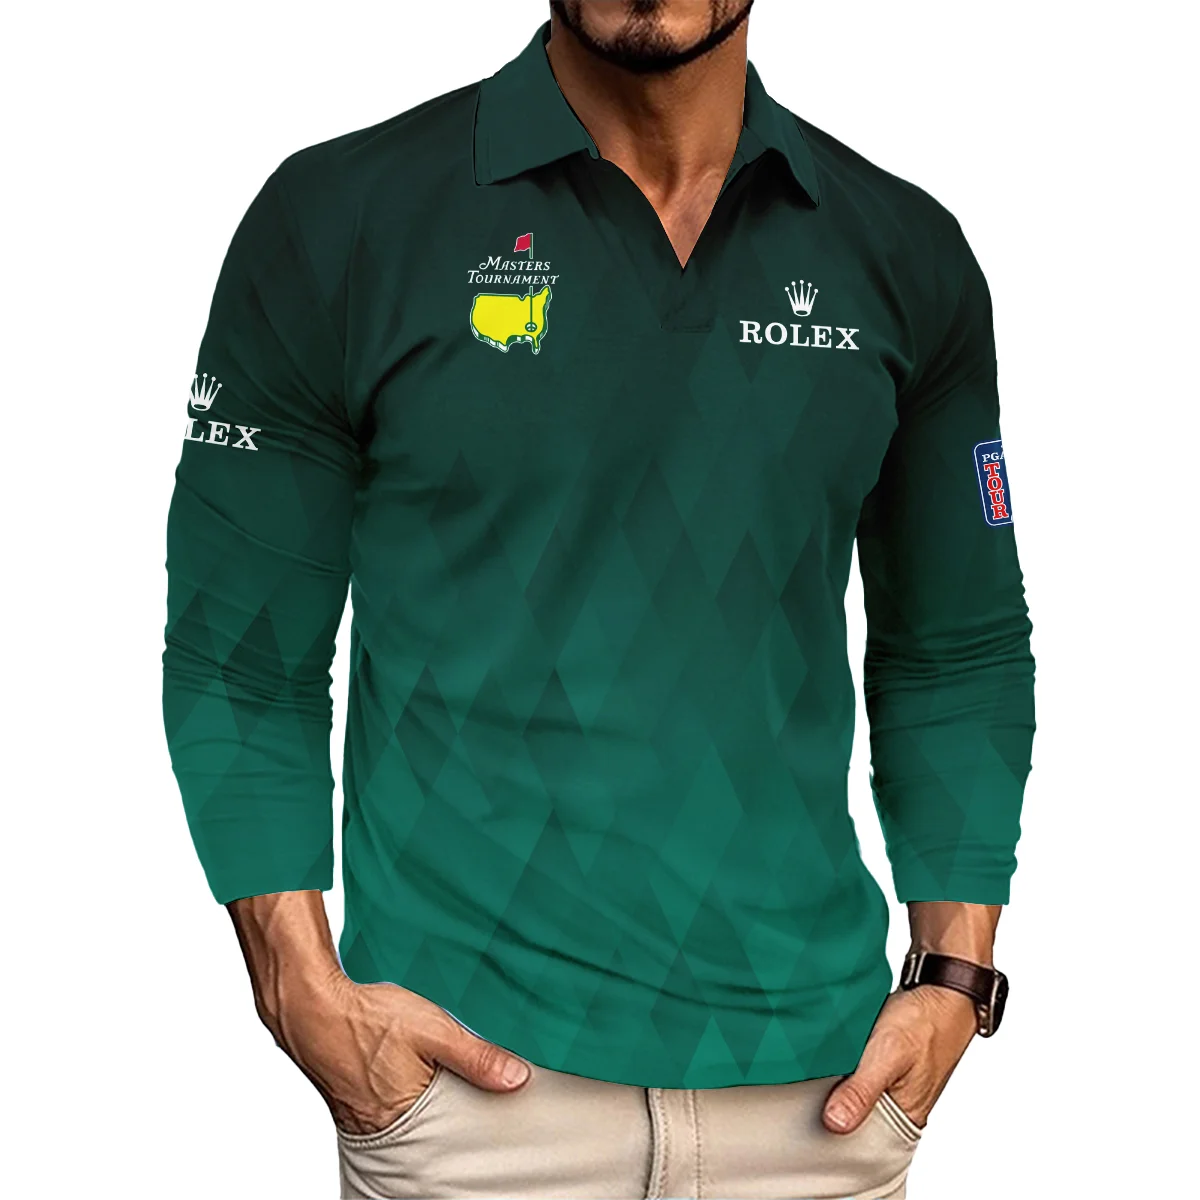 Gradient Dark Green Geometric Pattern Masters Tournament Rolex Polo Shirt Style Classic Polo Shirt For Men